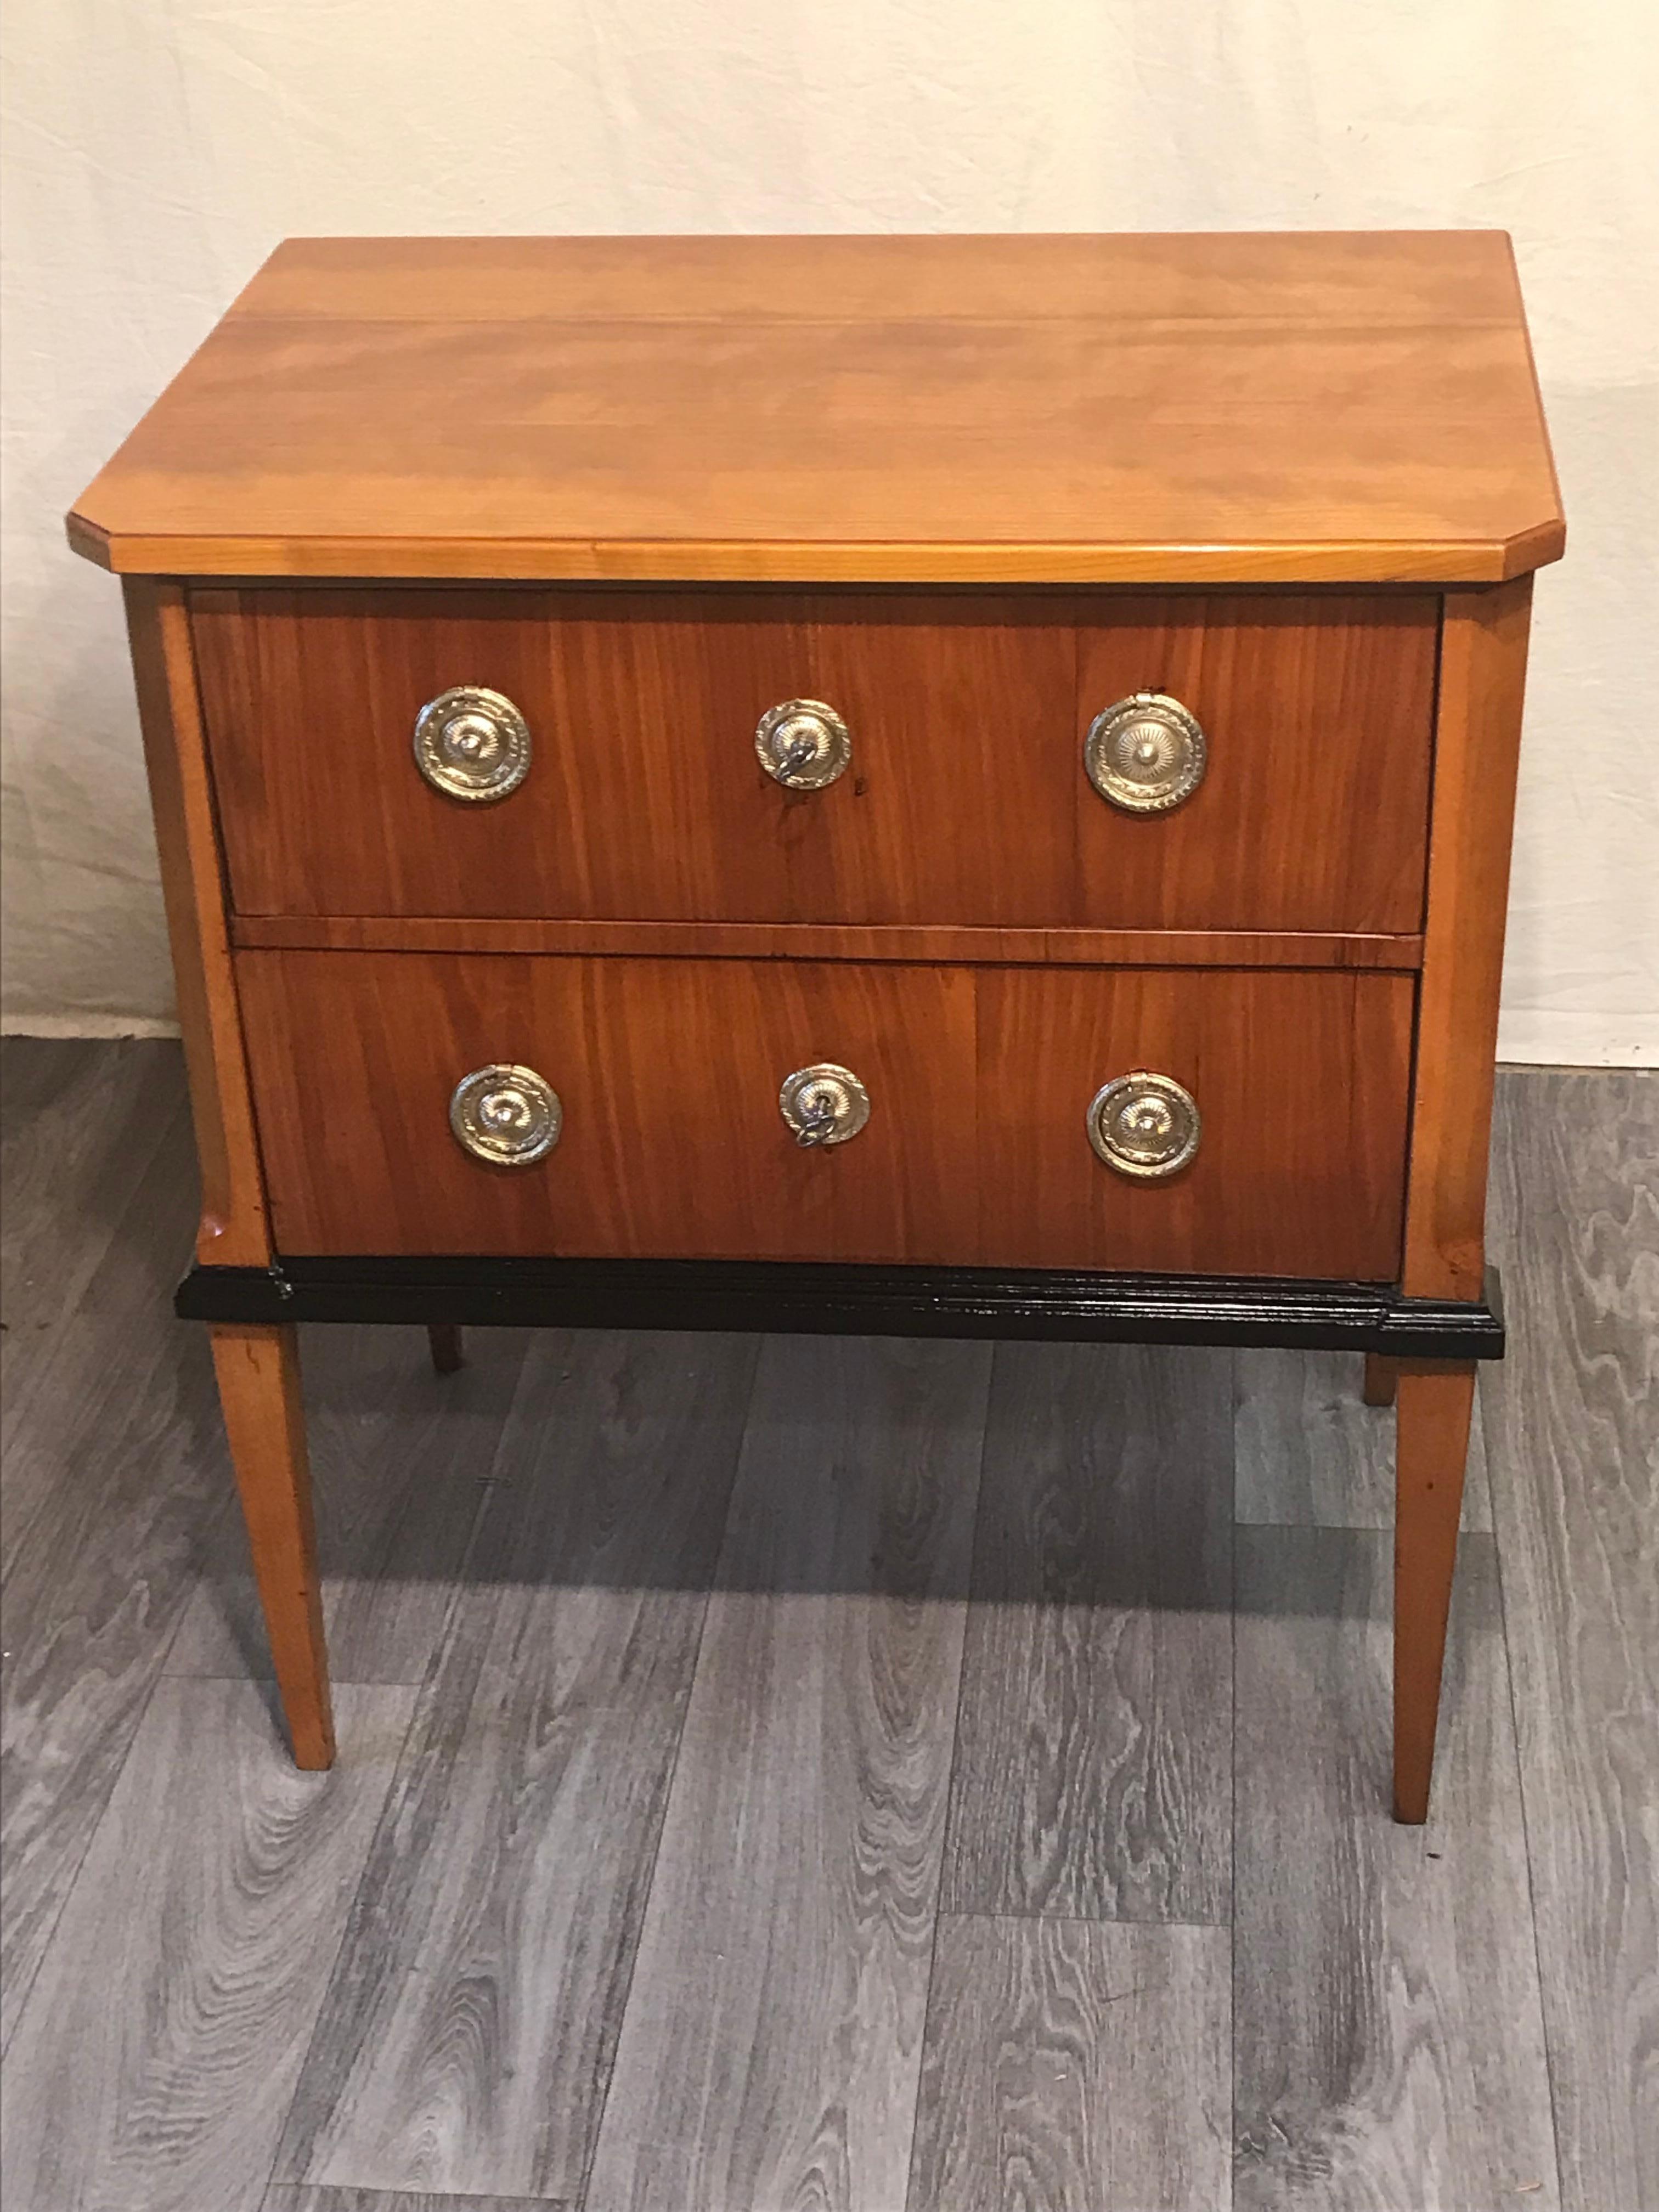 This elegant small Biedermeier chest of drawers comes from Southern Germany and dates back to 1830. The two drawer dresser stands on four pointed legs. It is decorated with cherry veneer and has ebonized details. 
It comes refinished and shellack